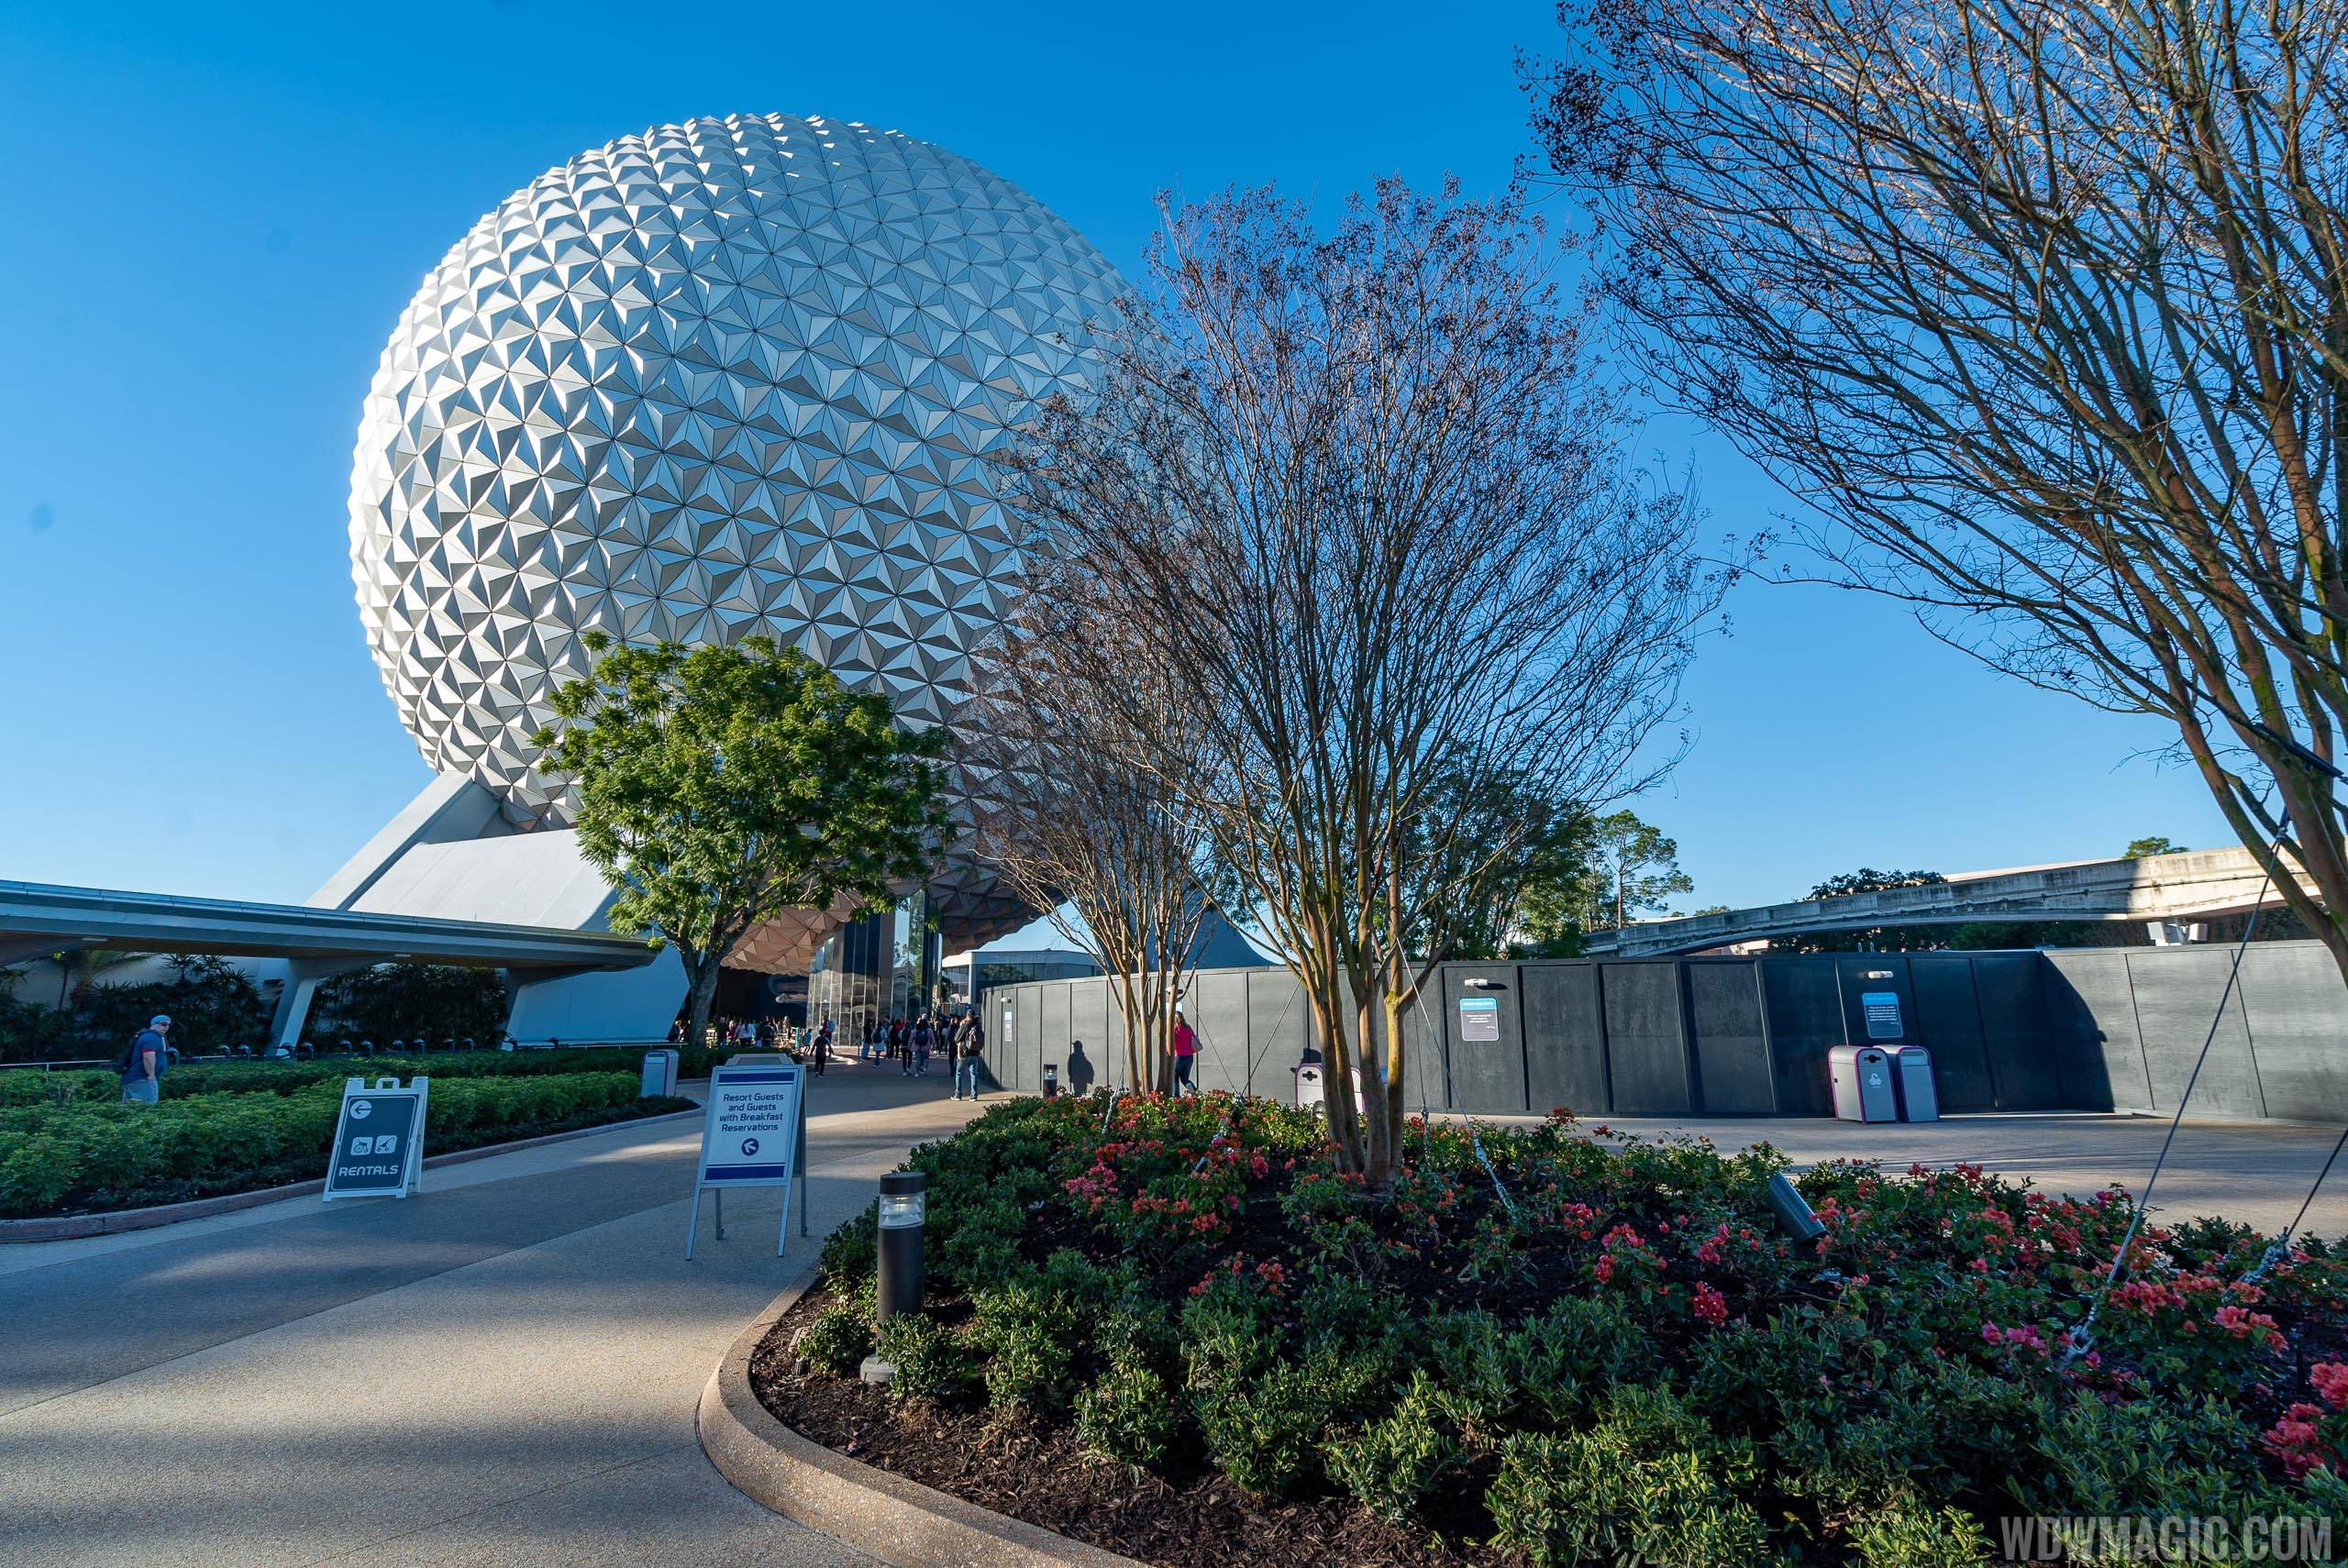 PHOTOS - More walls up at Epcot's main entrance as eastern side opens